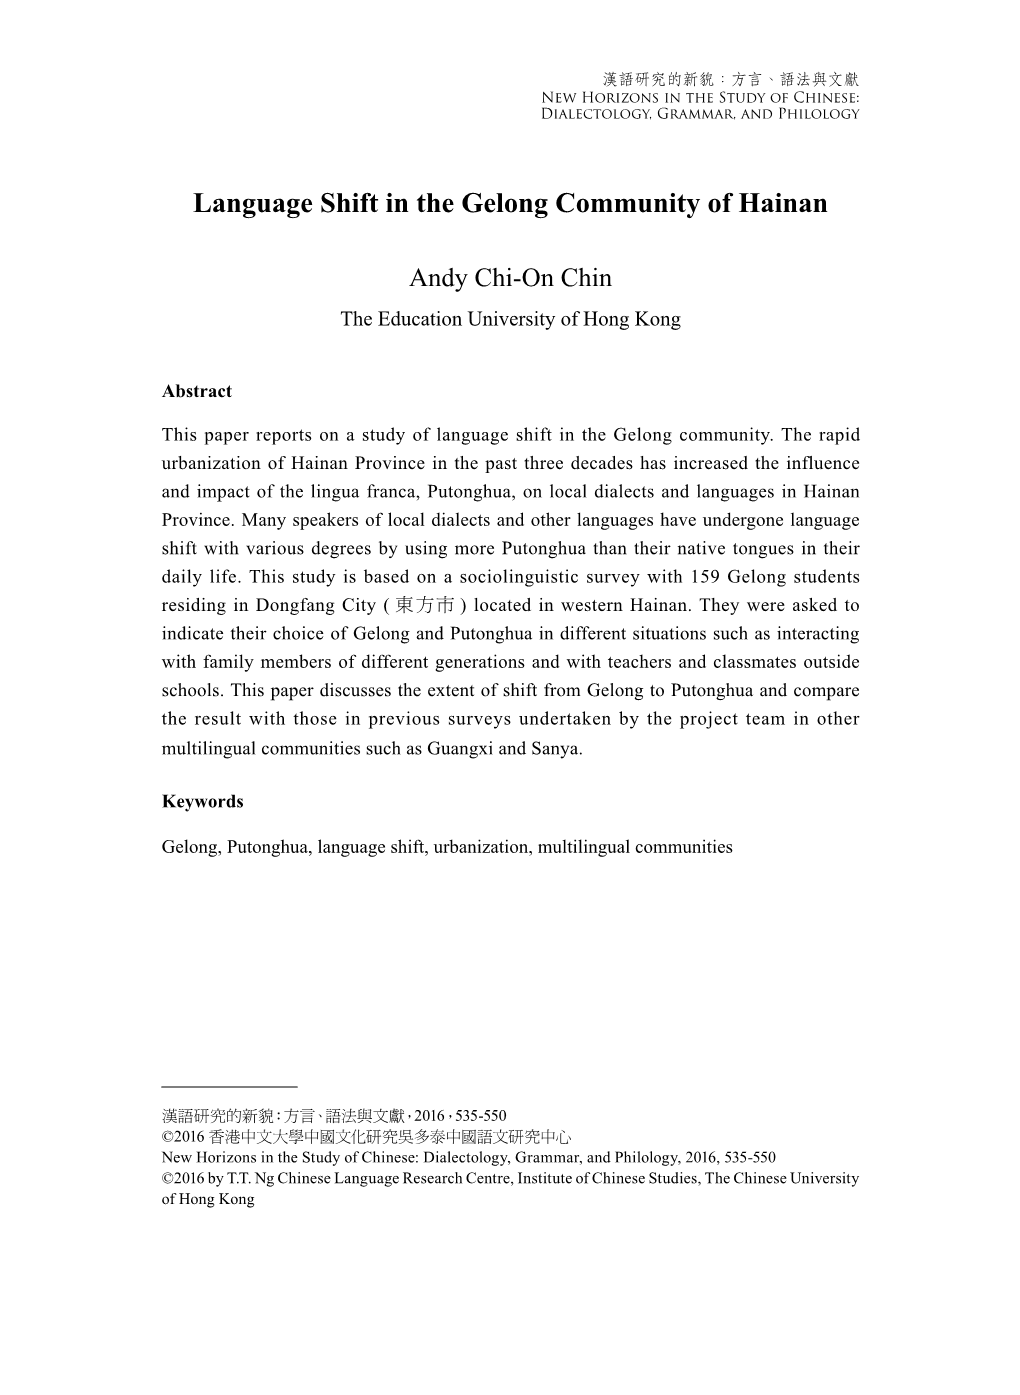 Language Shift in the Gelong Community of Hainan